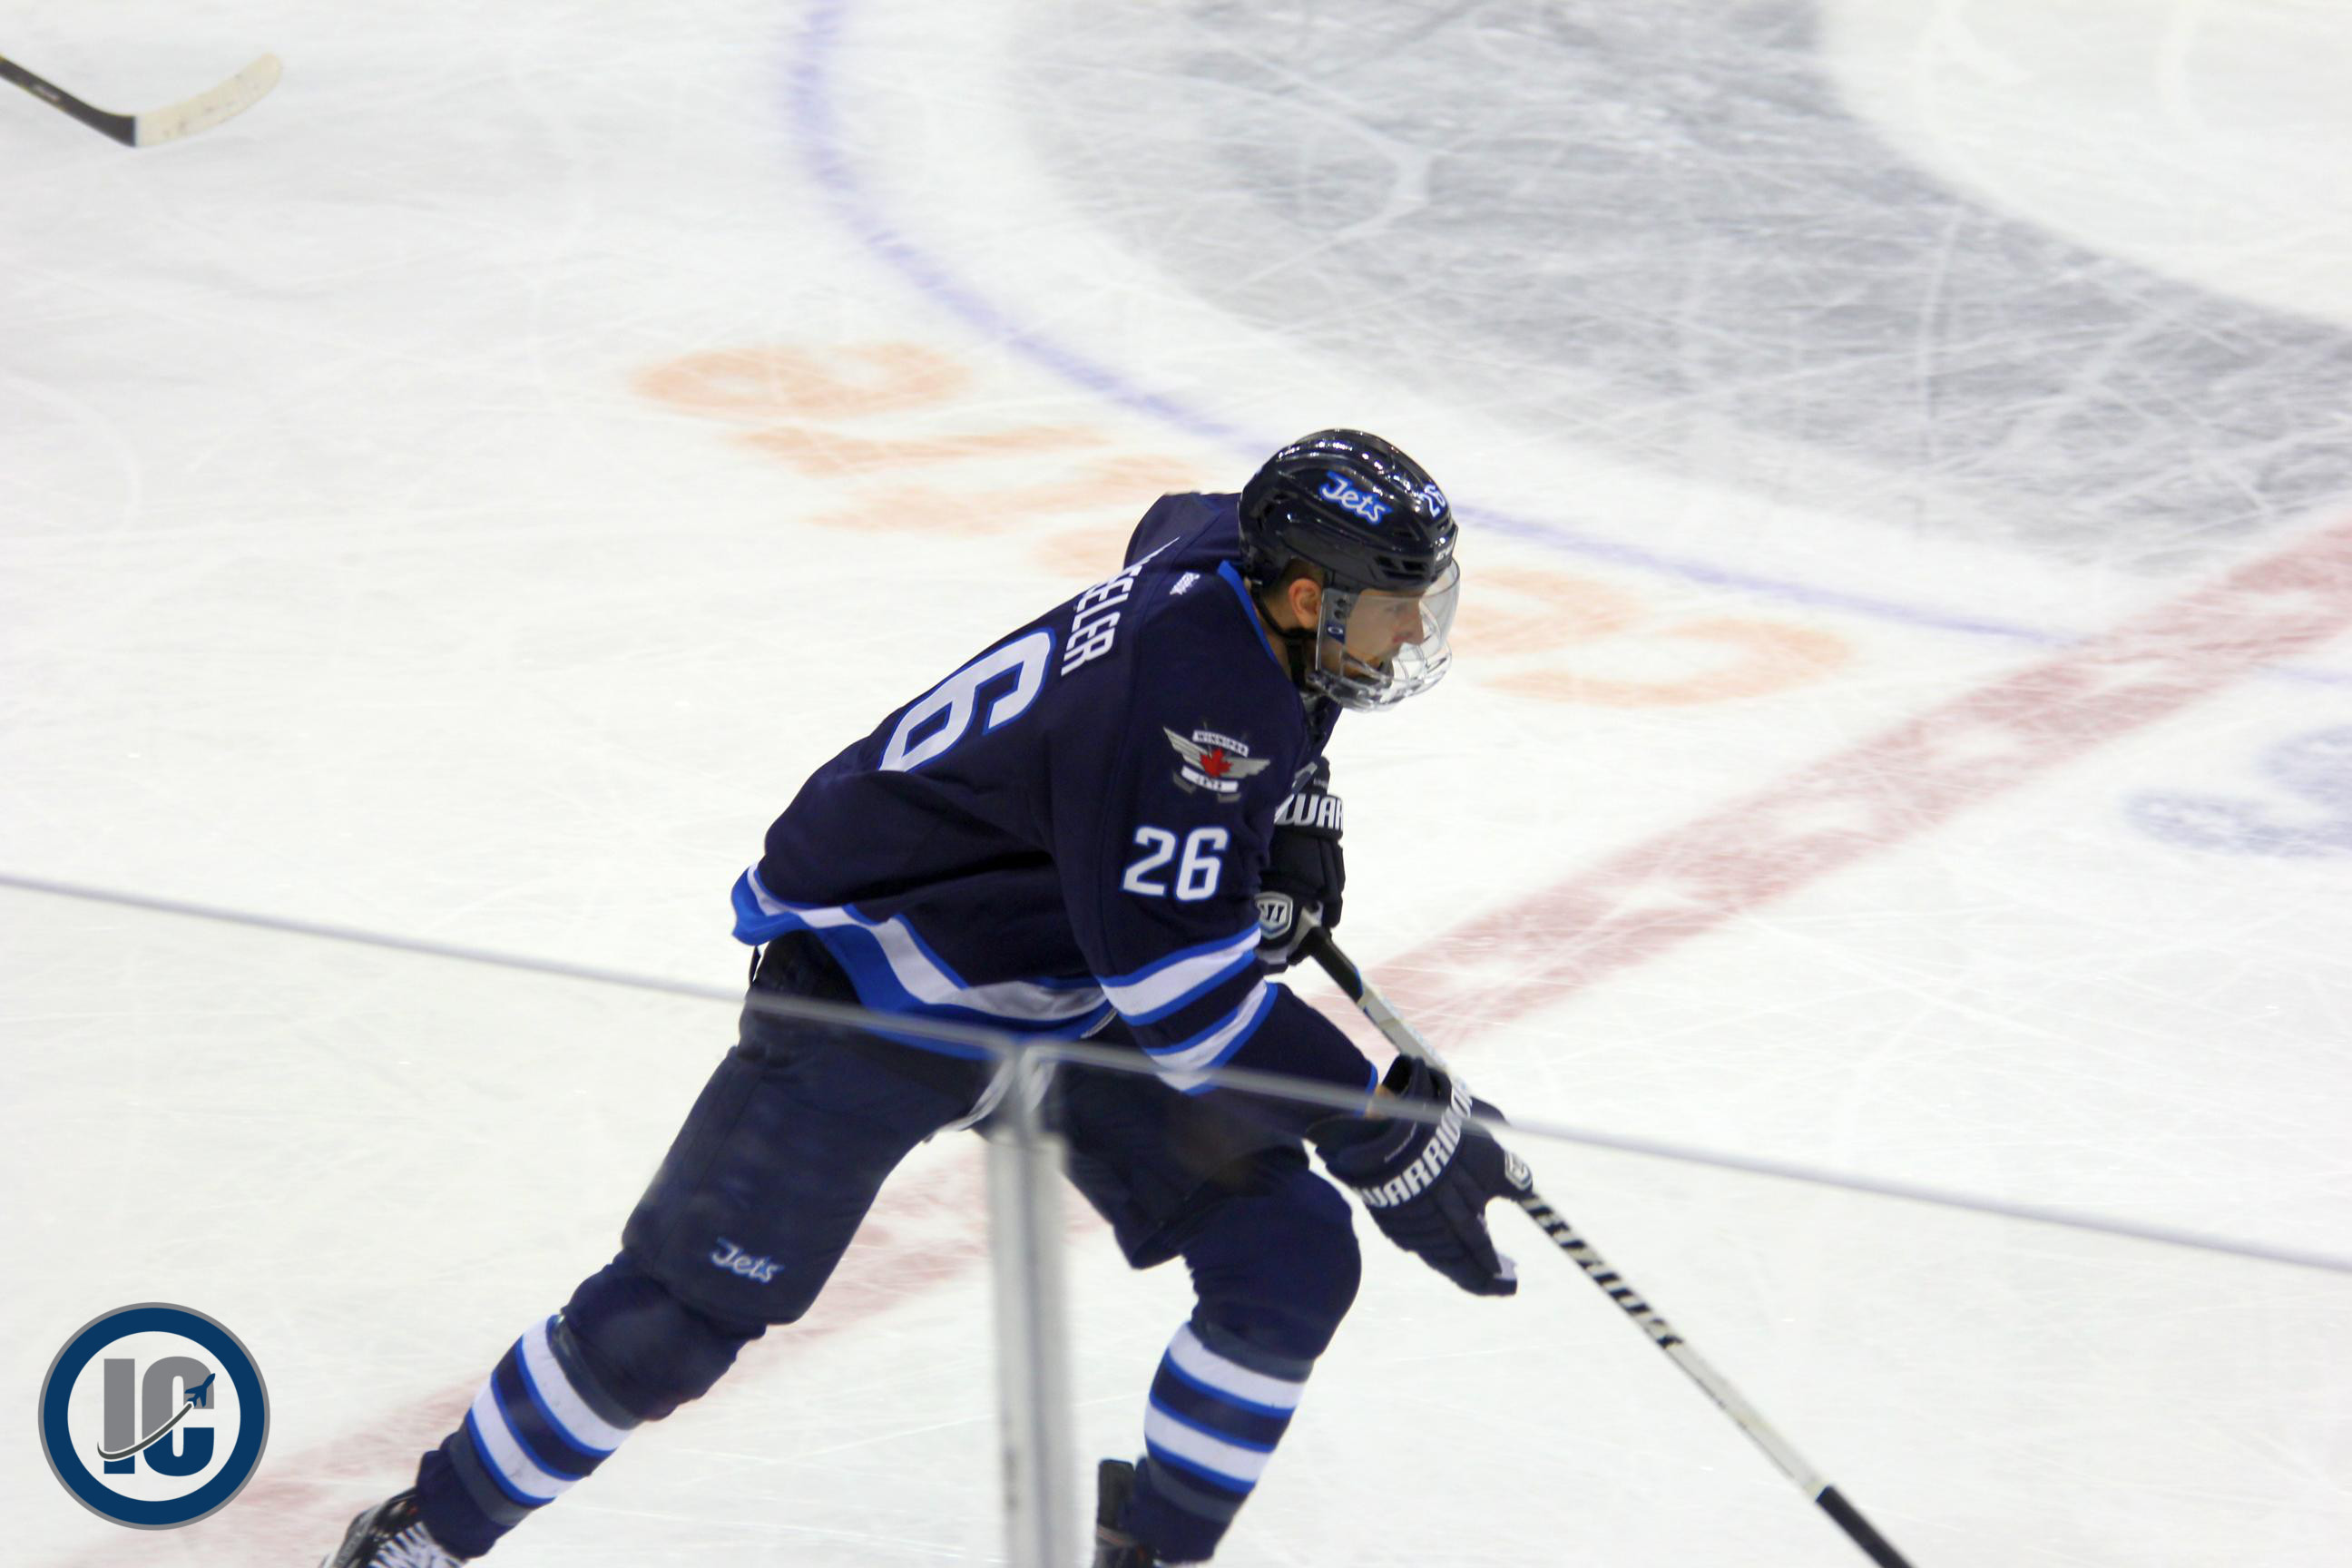 Wheeler with the mask